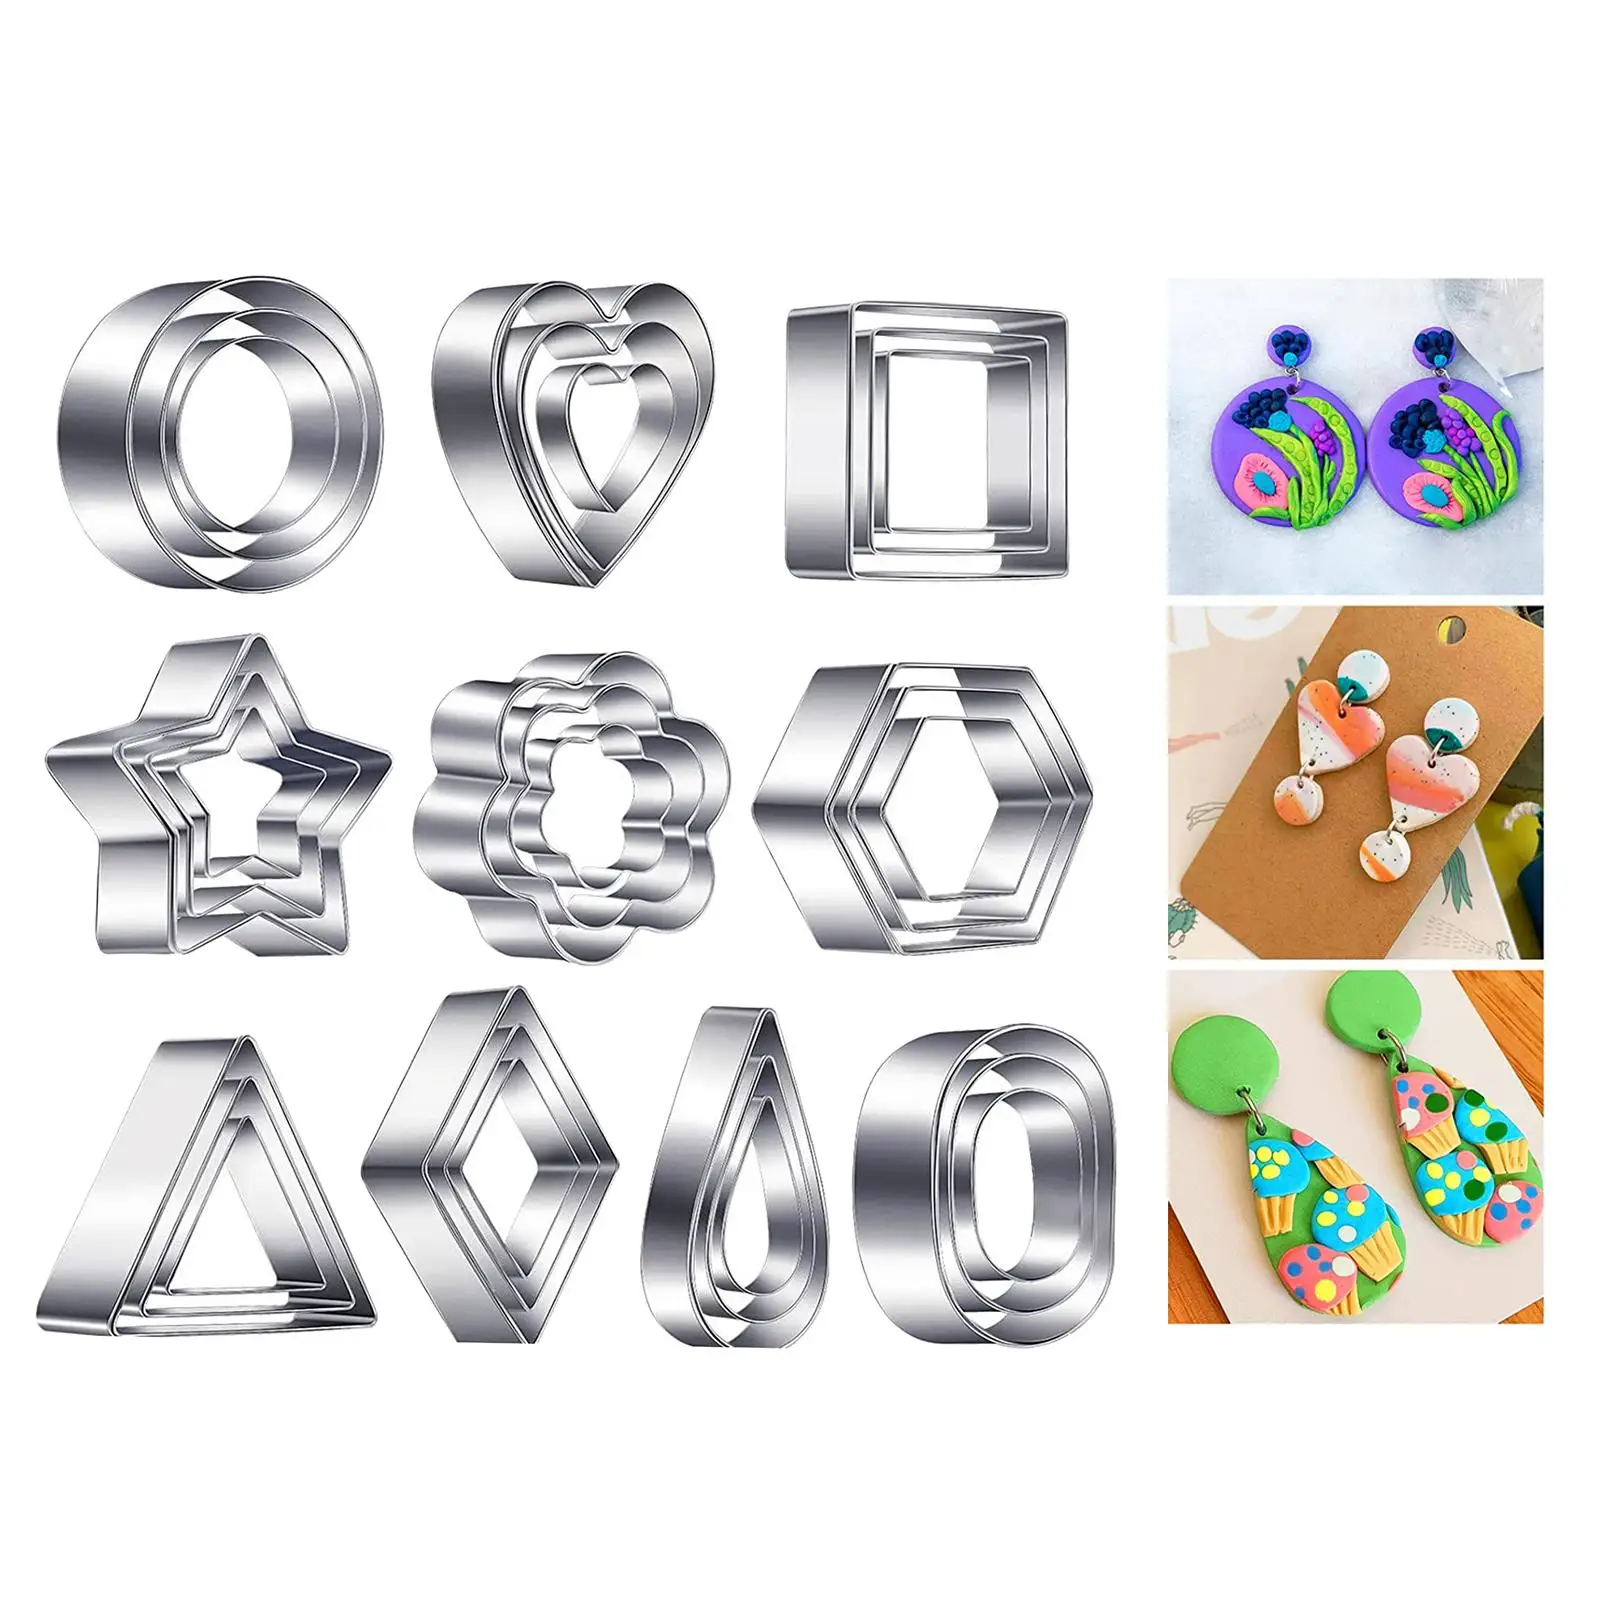 Handmade Polymer Clay Polymer  Punch  Cookie  Set  Supplies Stainless Steel for Jewelry Making Baking